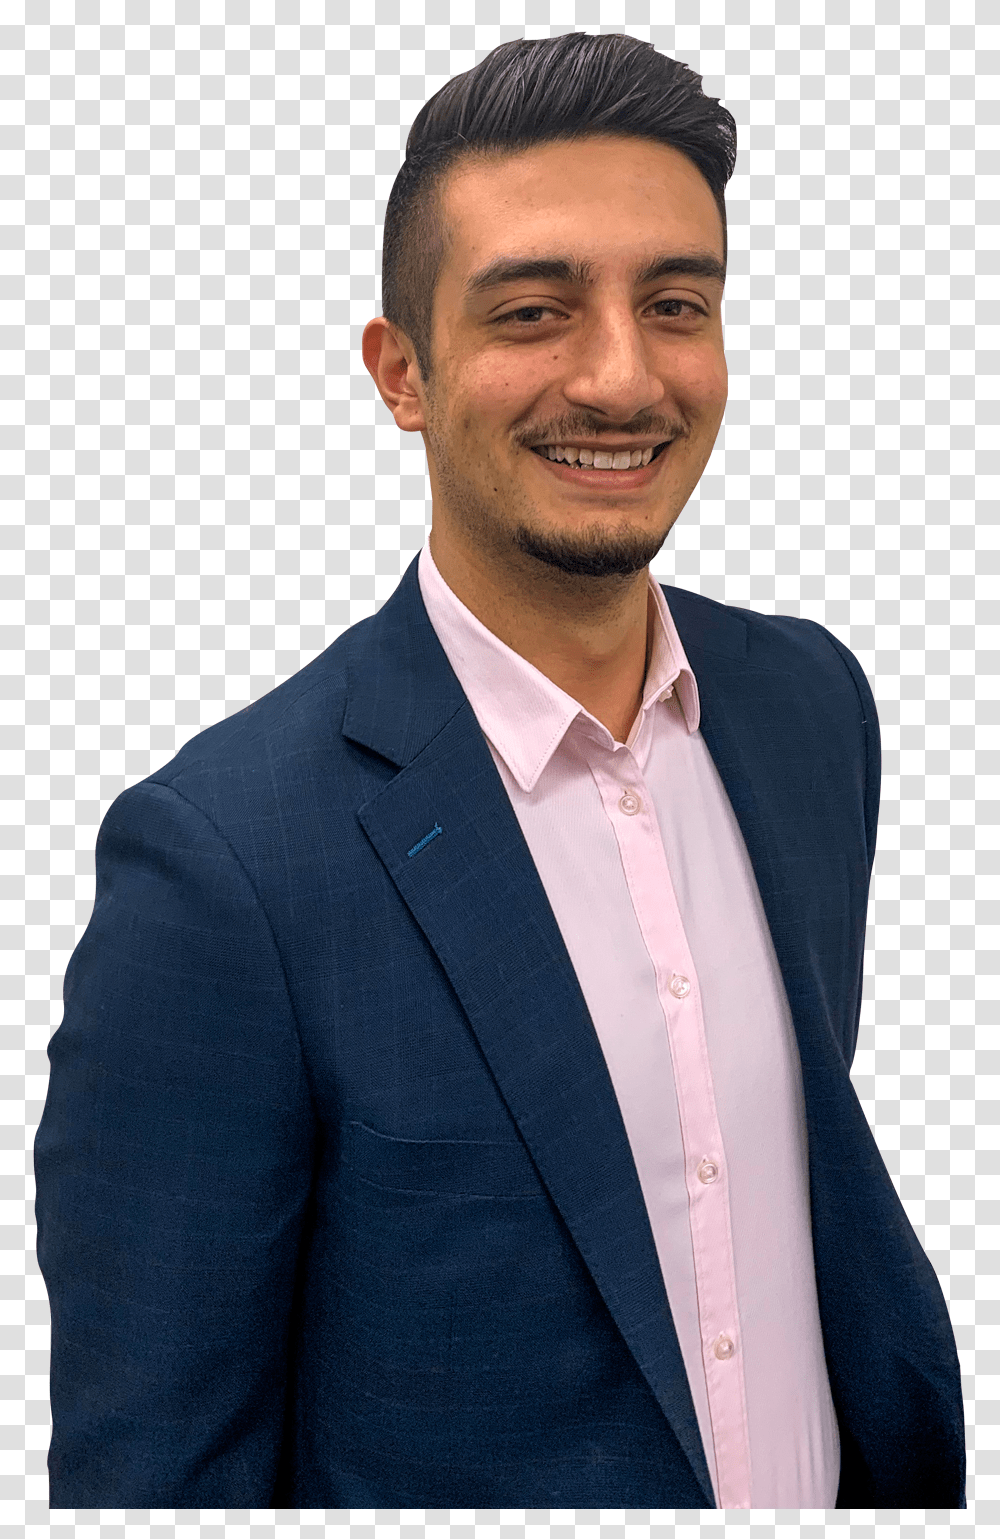 Guy Dimitriou In Suit, Person, Clothing, Man, Overcoat Transparent Png